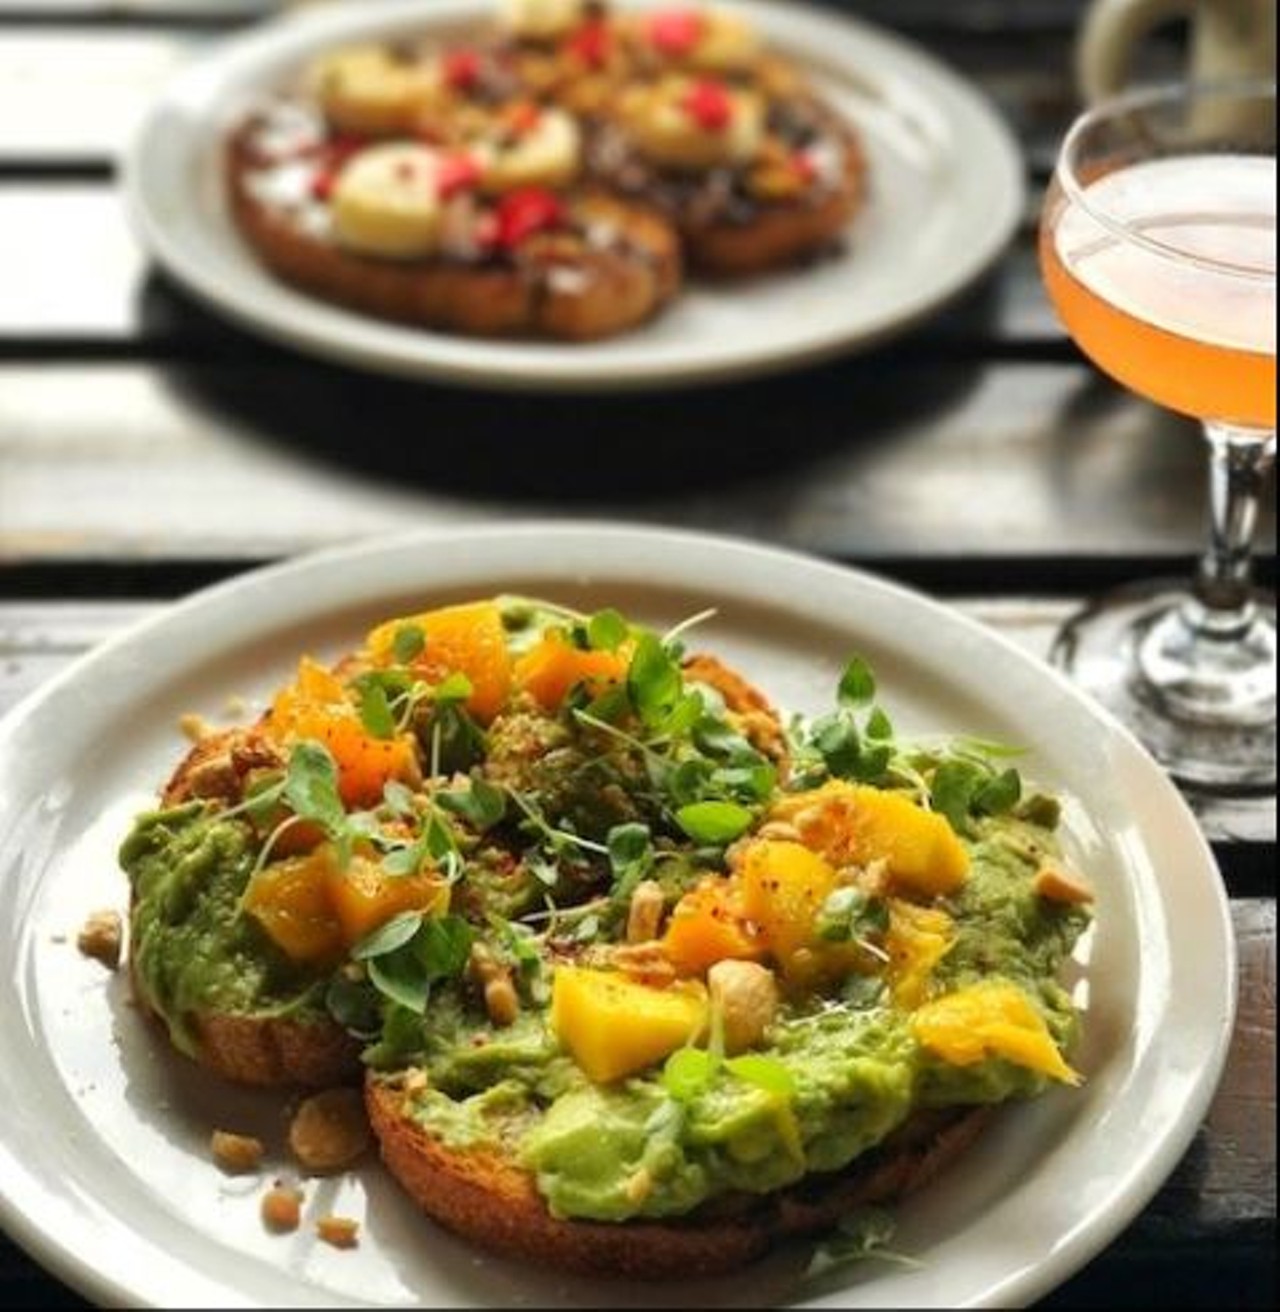 What to order - Avocado Toast
Instead of buying a home opt for the classic hipster dish. Ask for the Avocado toast on Avalon sourdough with smashed avocado, mango, chilies, Marcona, almonds and microgreens.
Photo via Aparna B